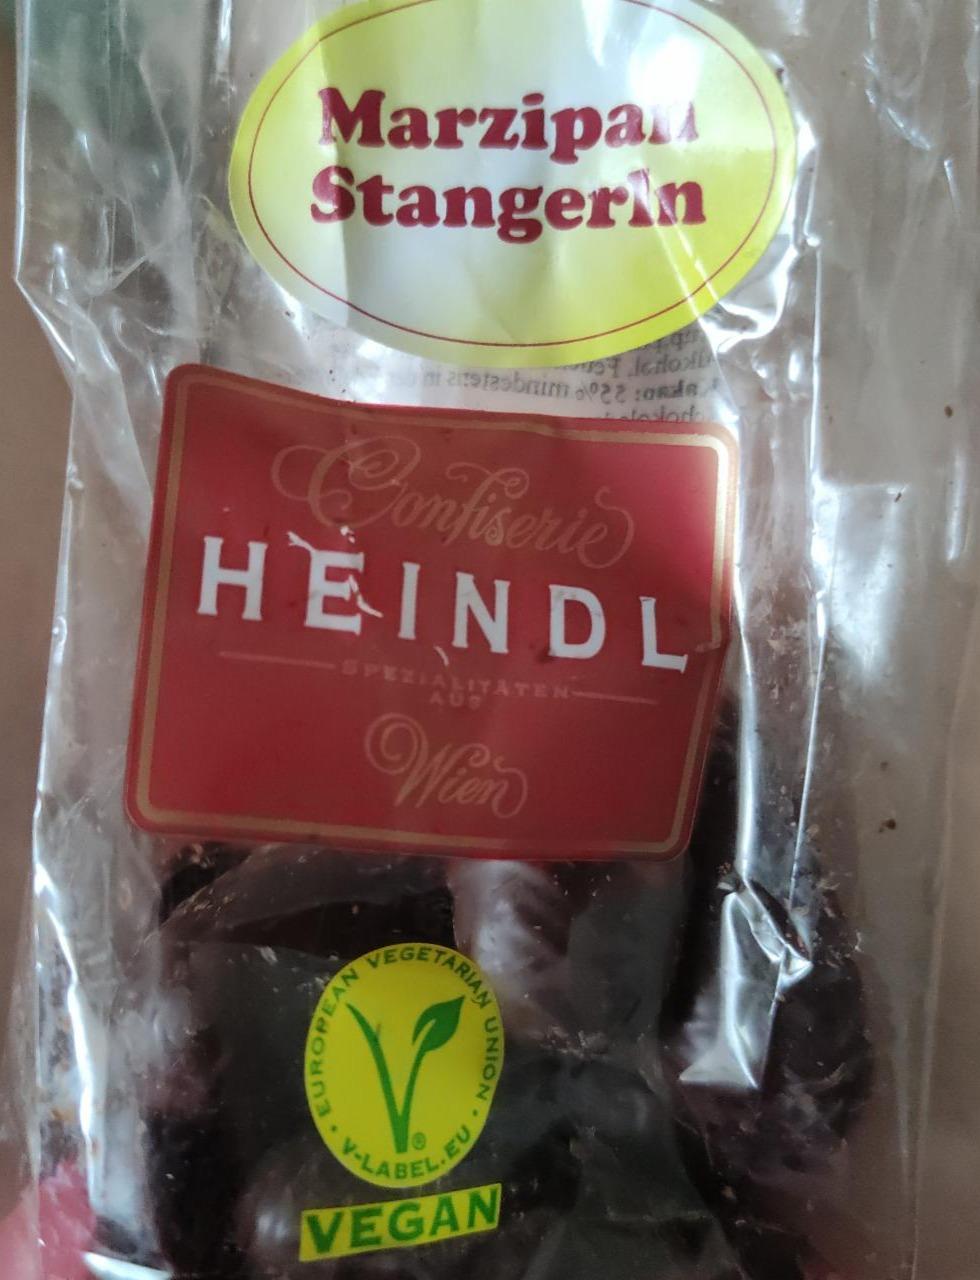 Fotografie - Marzipan Stagerln Heindl